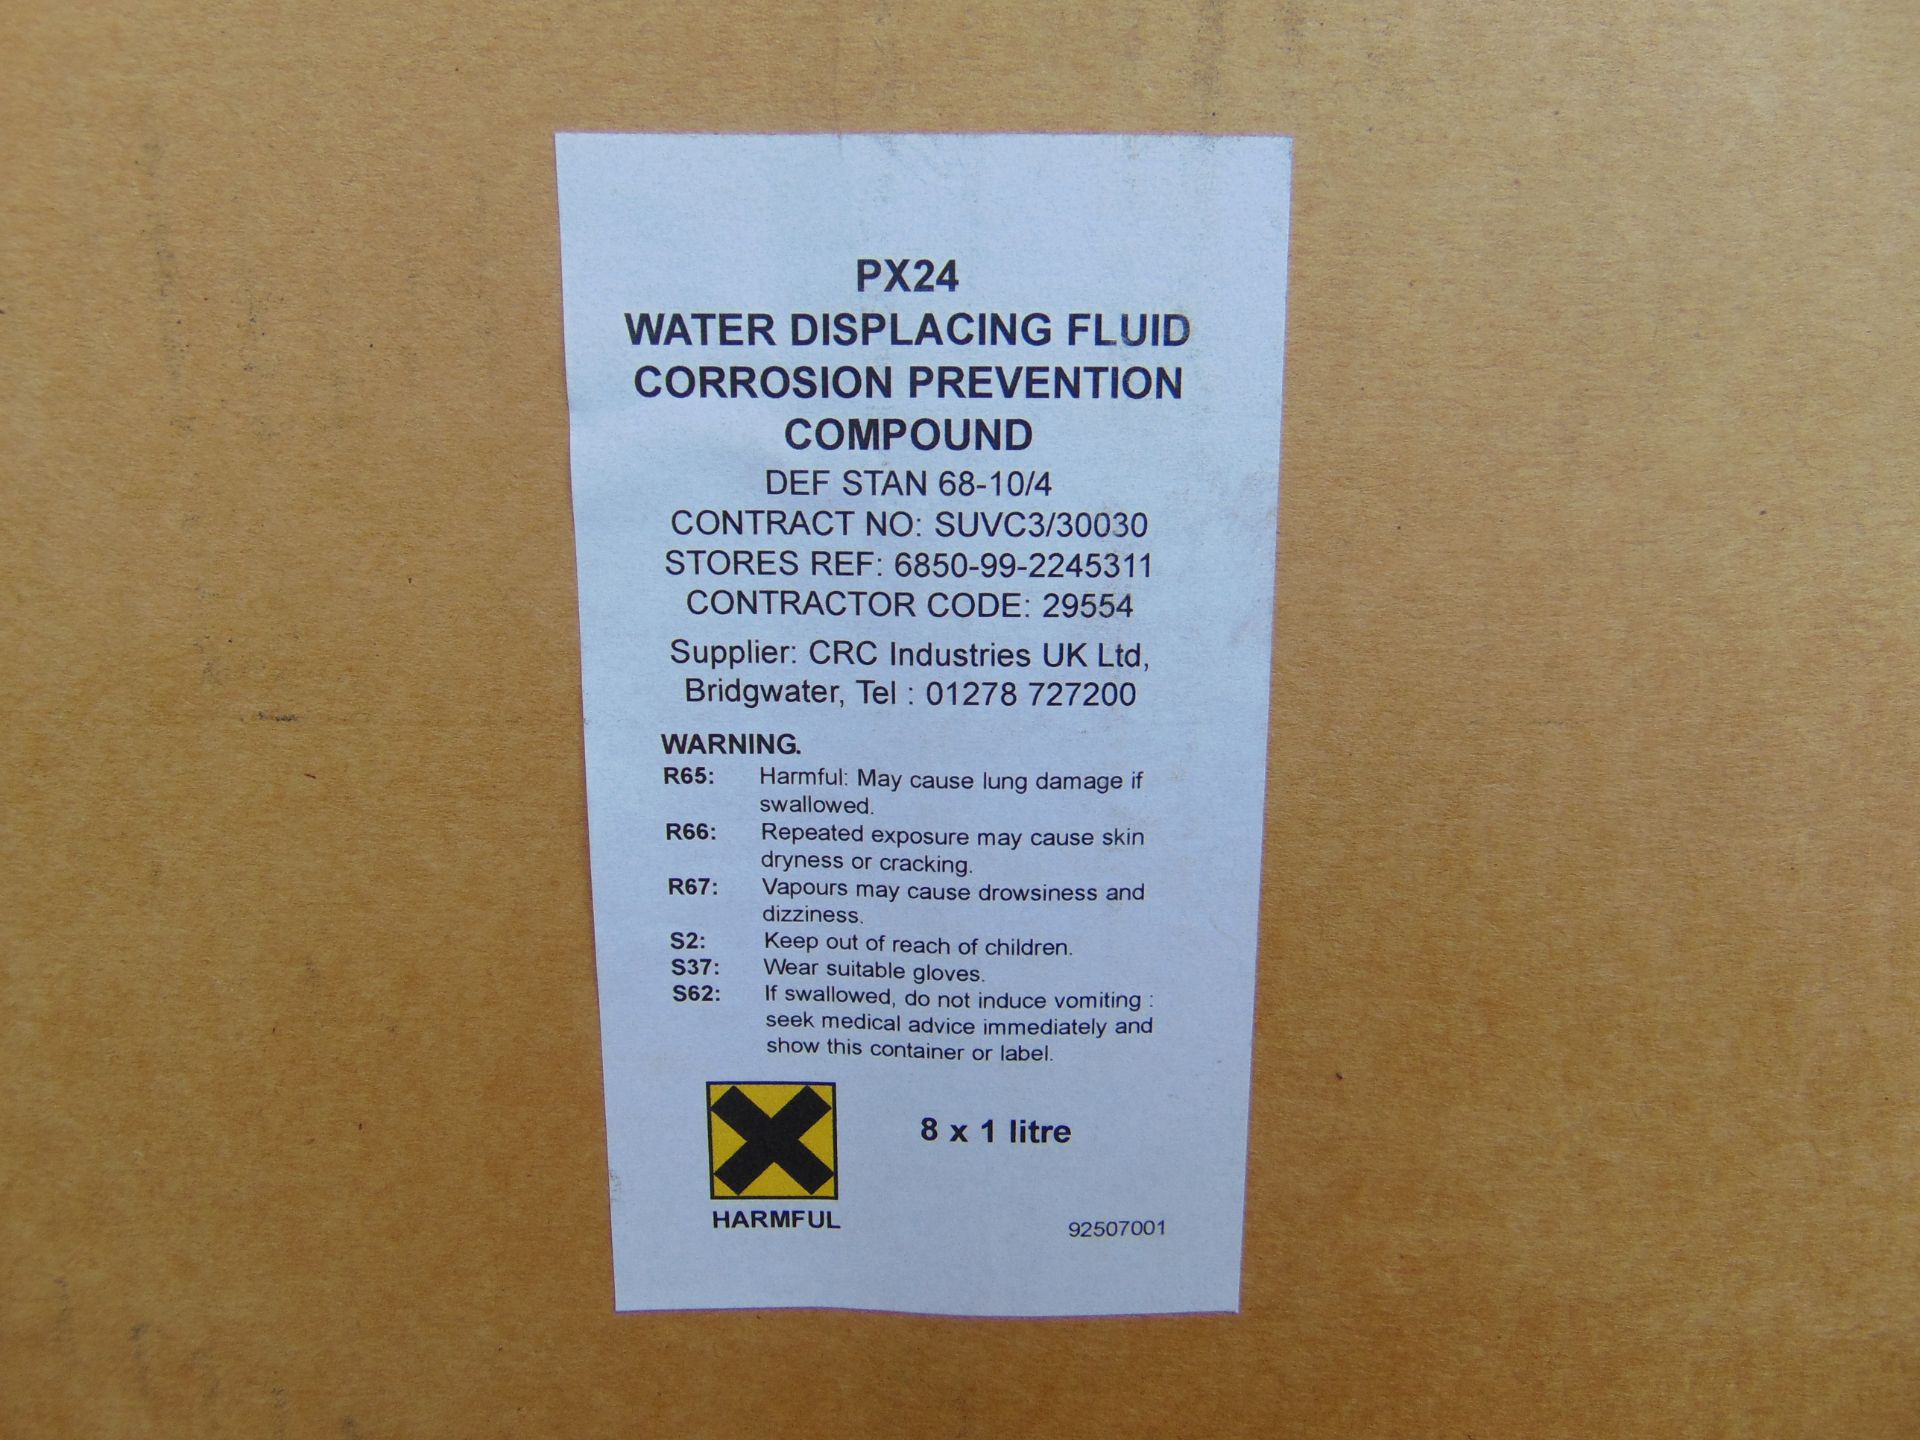 16 x 1 Ltr Bottles of PX24 Water Displacing Fluid Corrosion Prevention Compound - Image 5 of 6